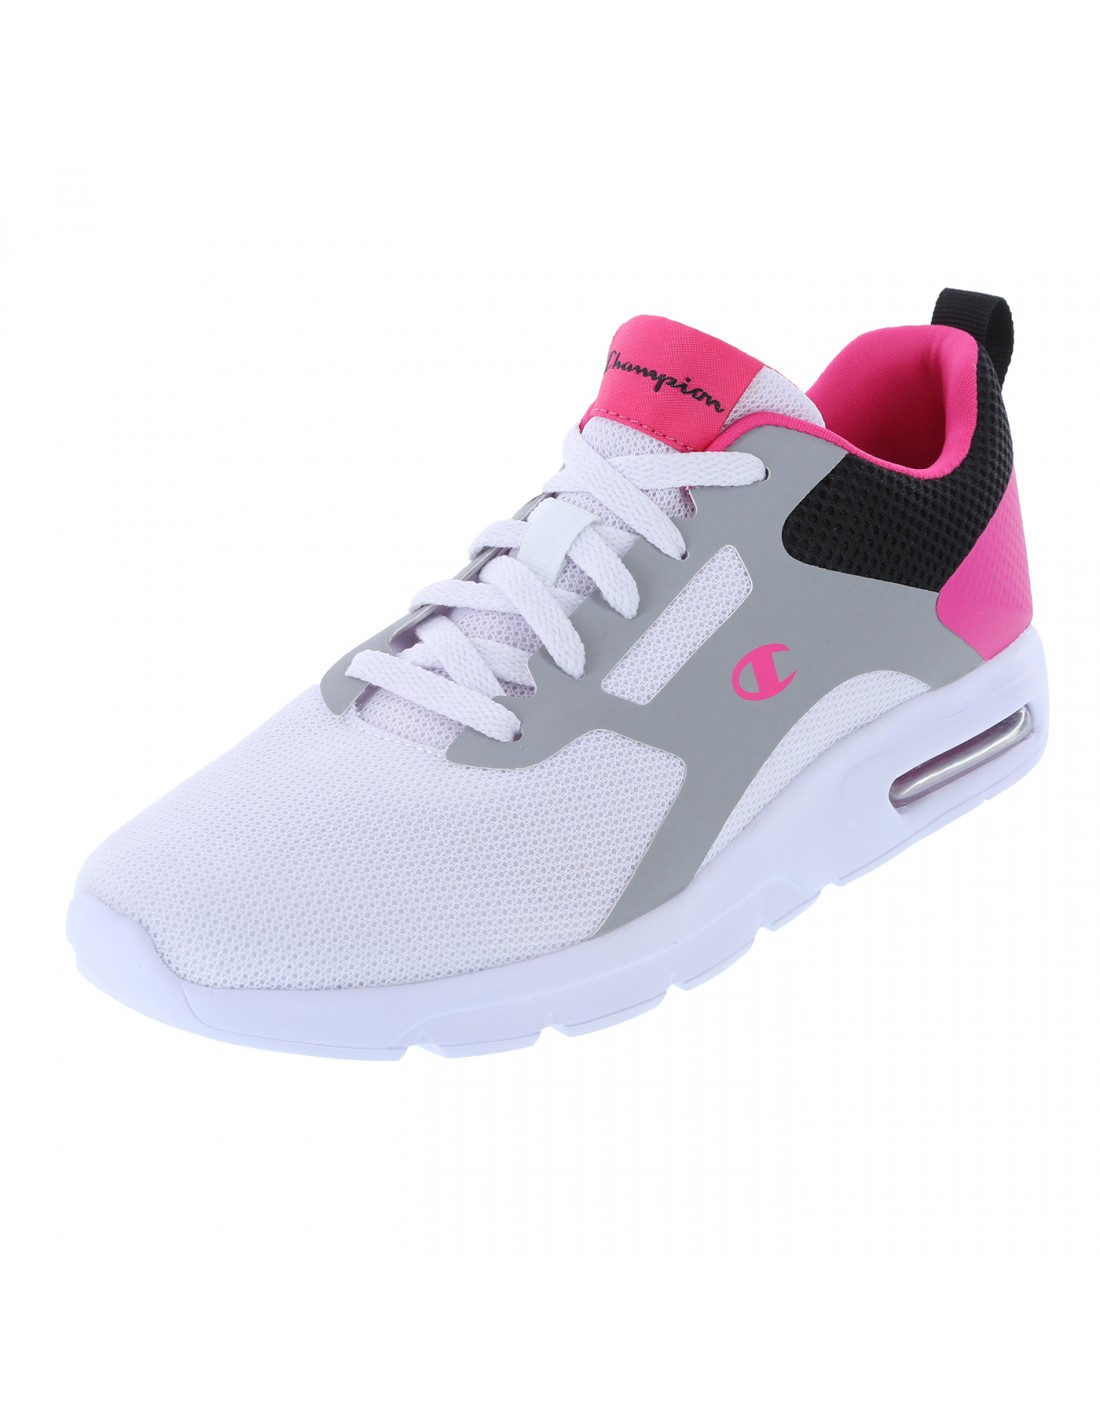 champion tennis shoes payless